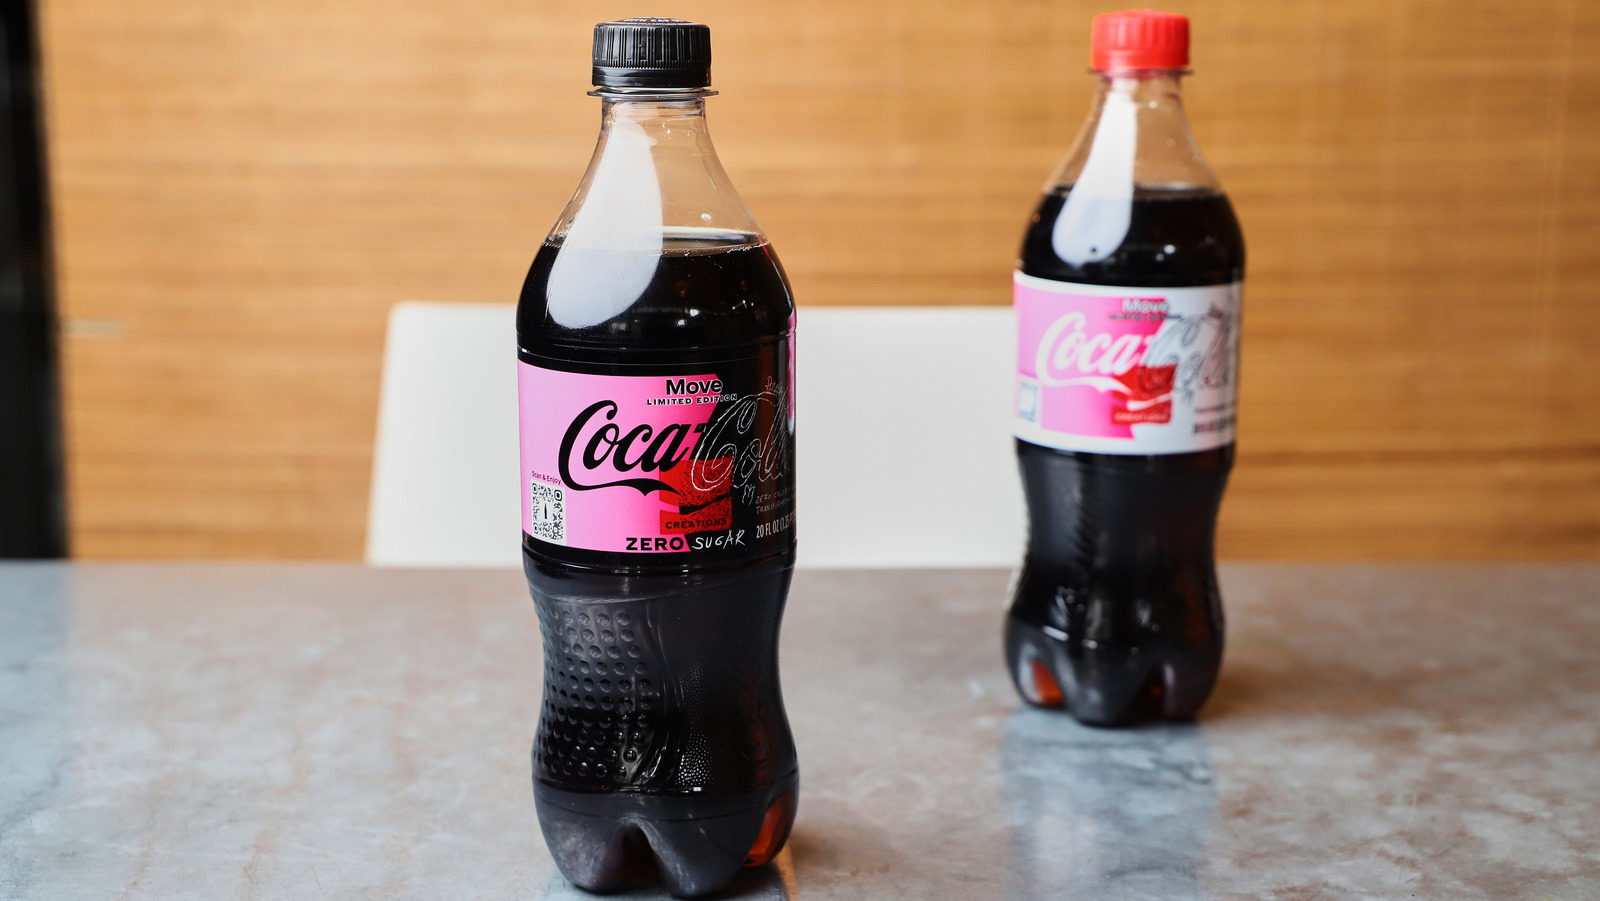 We Tried The New Coke 'Transformation' Flavor So You Don't Have To